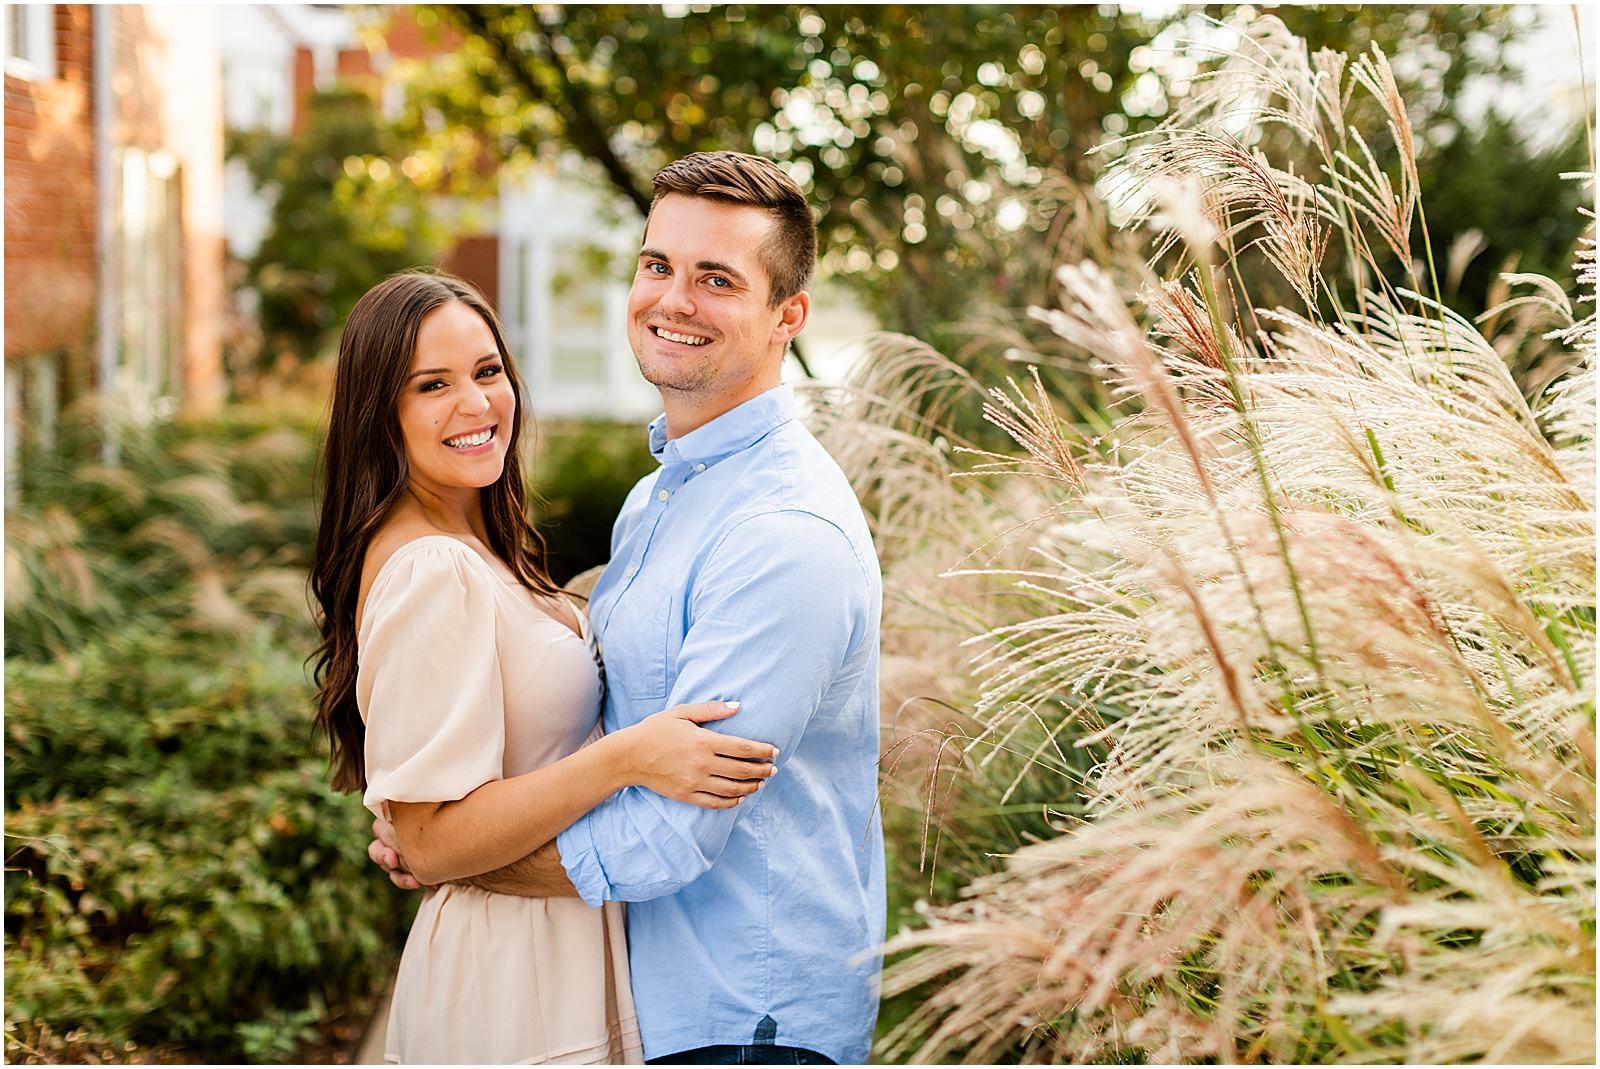 Emma and Jace's Downtown Newburgh Engagement Session | Bret and Brandie Photography | Evansville Indiana Wedding Photographers_0032.jpg